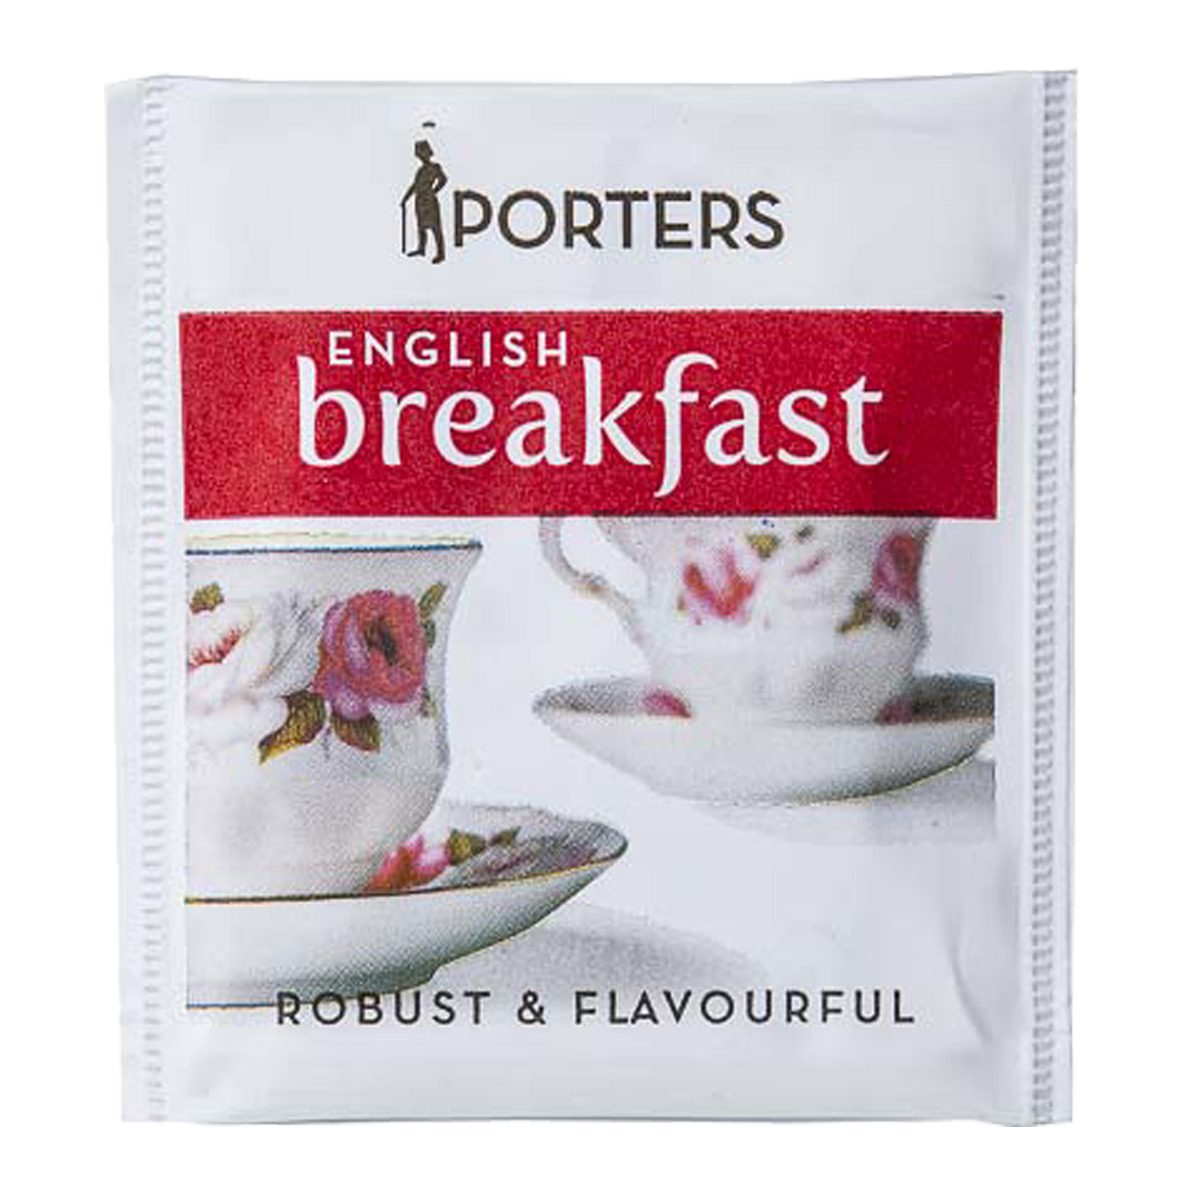 consumables-hospitality-beverage-food-porter-english—breakfast-teabags-x200-bags-blend-best-quality-teas-highlands-east-africa-ceylon-epitome-traditional-british-cupppa-robust-vjs-distributors-HPTEB